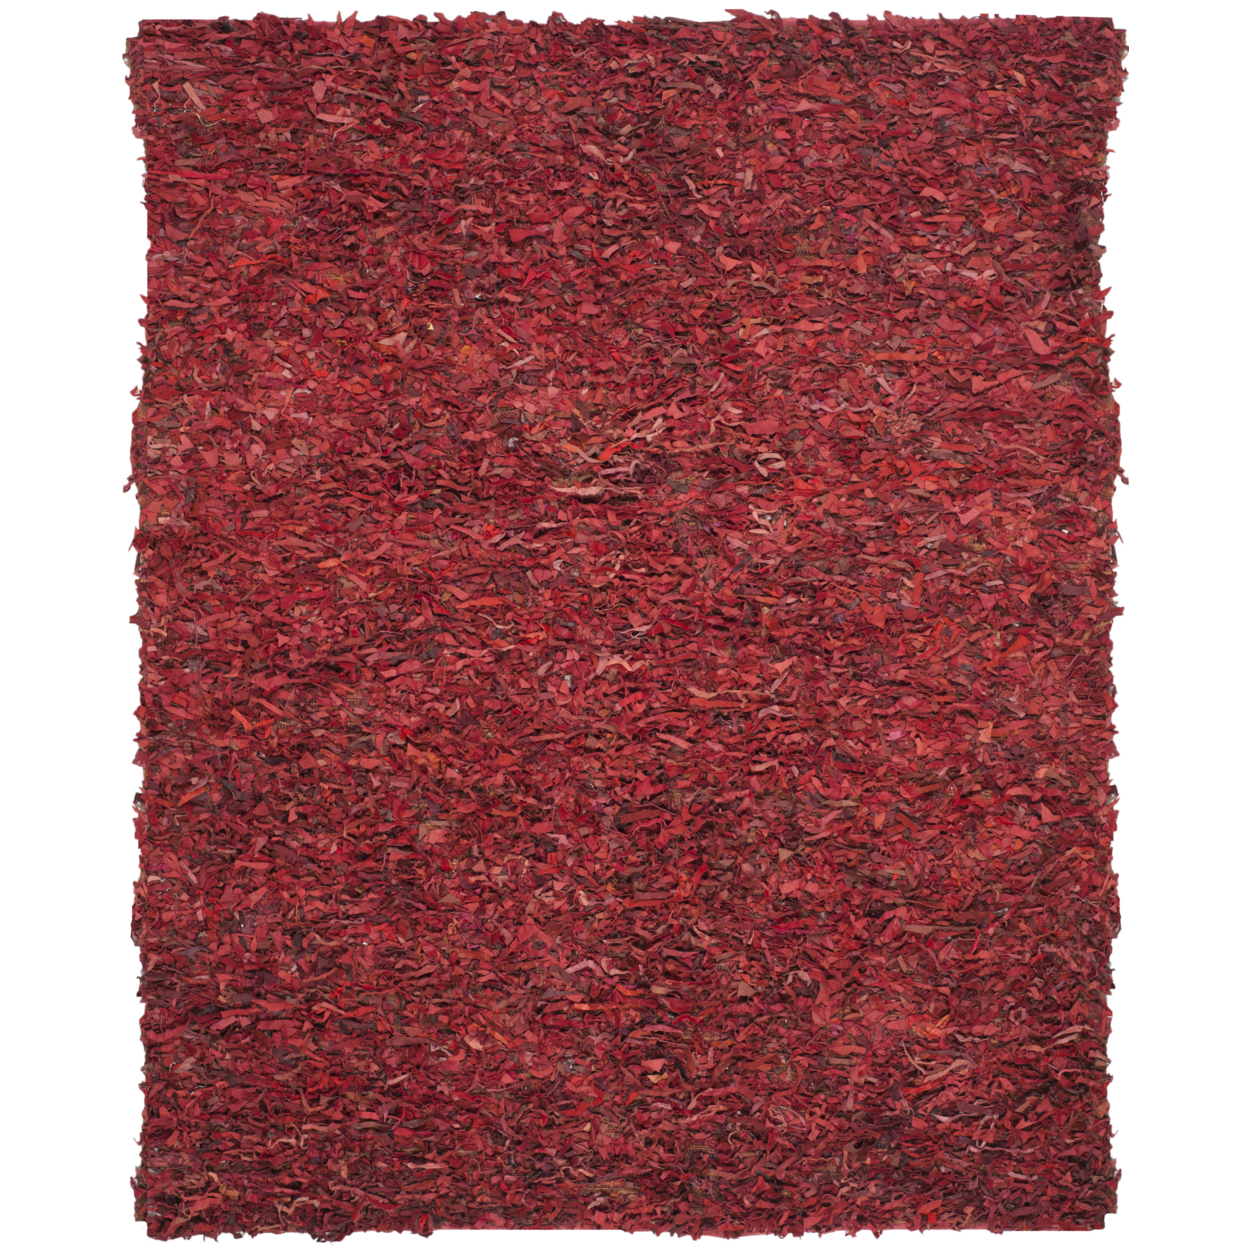 SAFAVIEH Leather Shag LSG511D Hand-knotted Red Rug - 6' X 9'